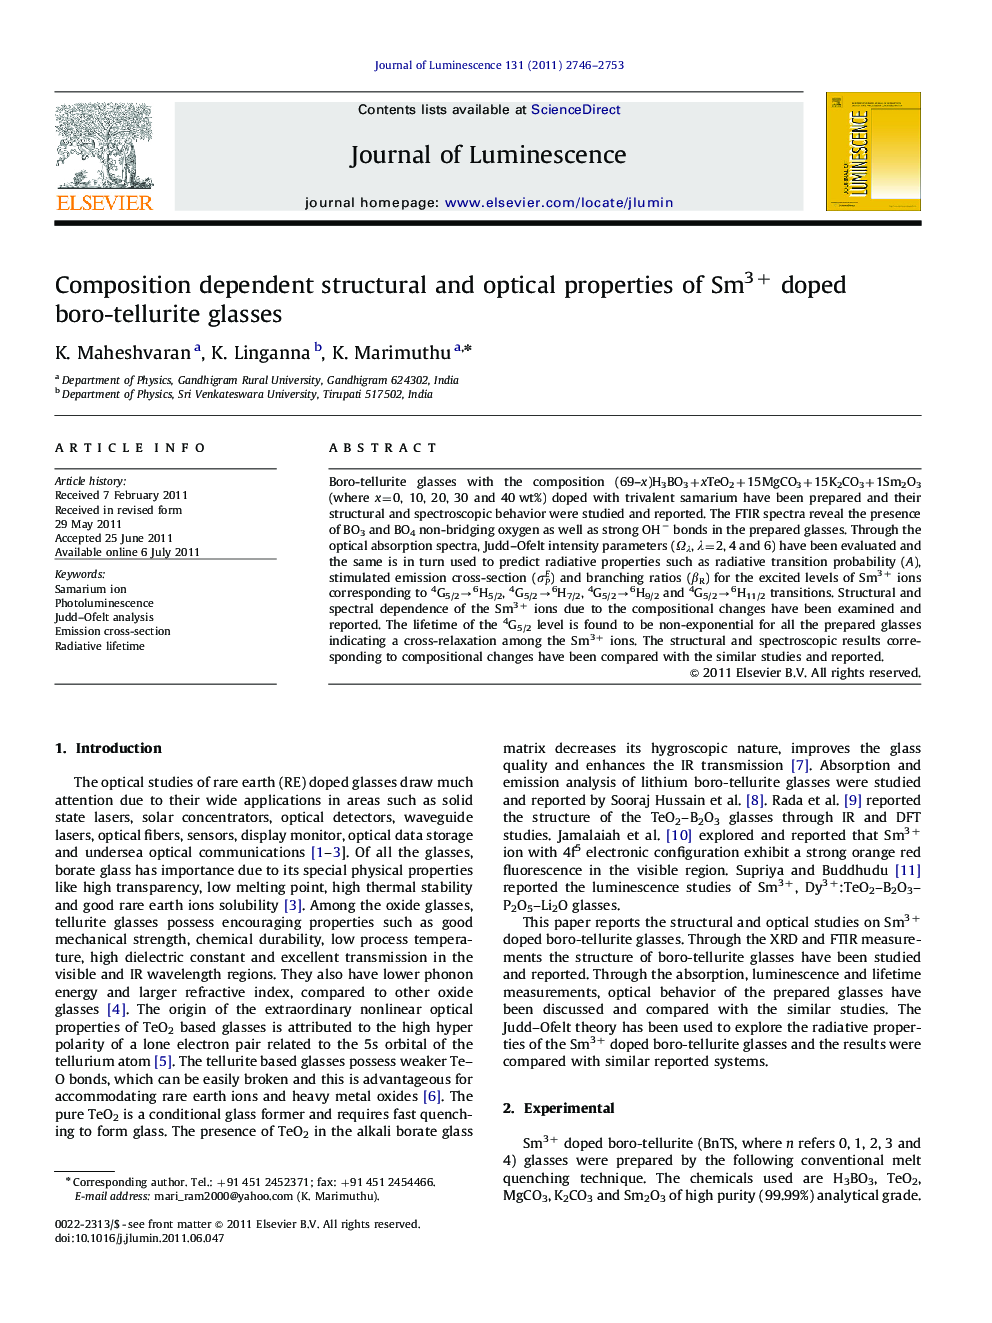 Composition dependent structural and optical properties of Sm3+ doped boro-tellurite glasses